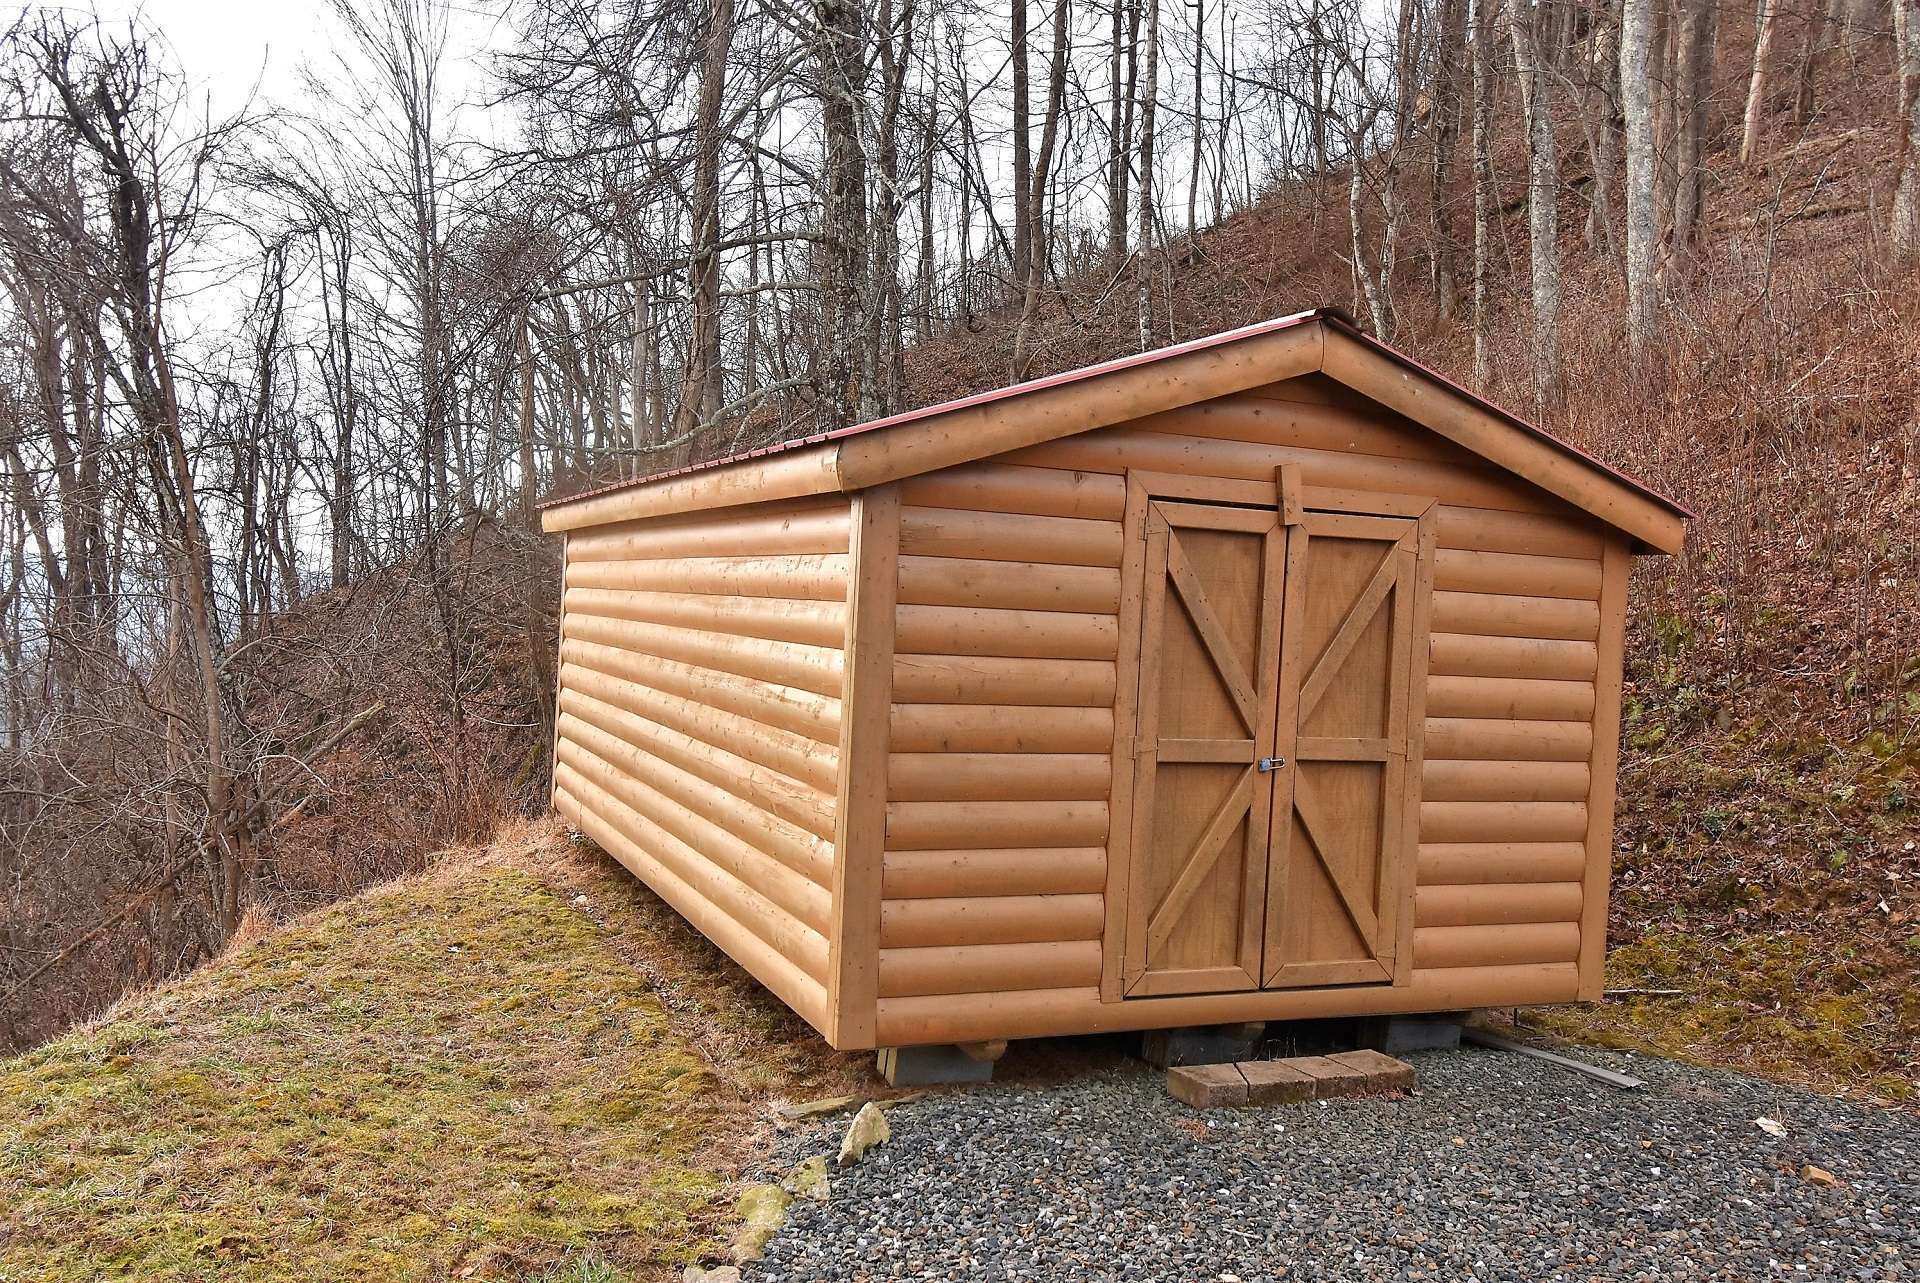 You will find this outbuilding convenient for storing all or your lawn equipment, tools, and mountain toys.